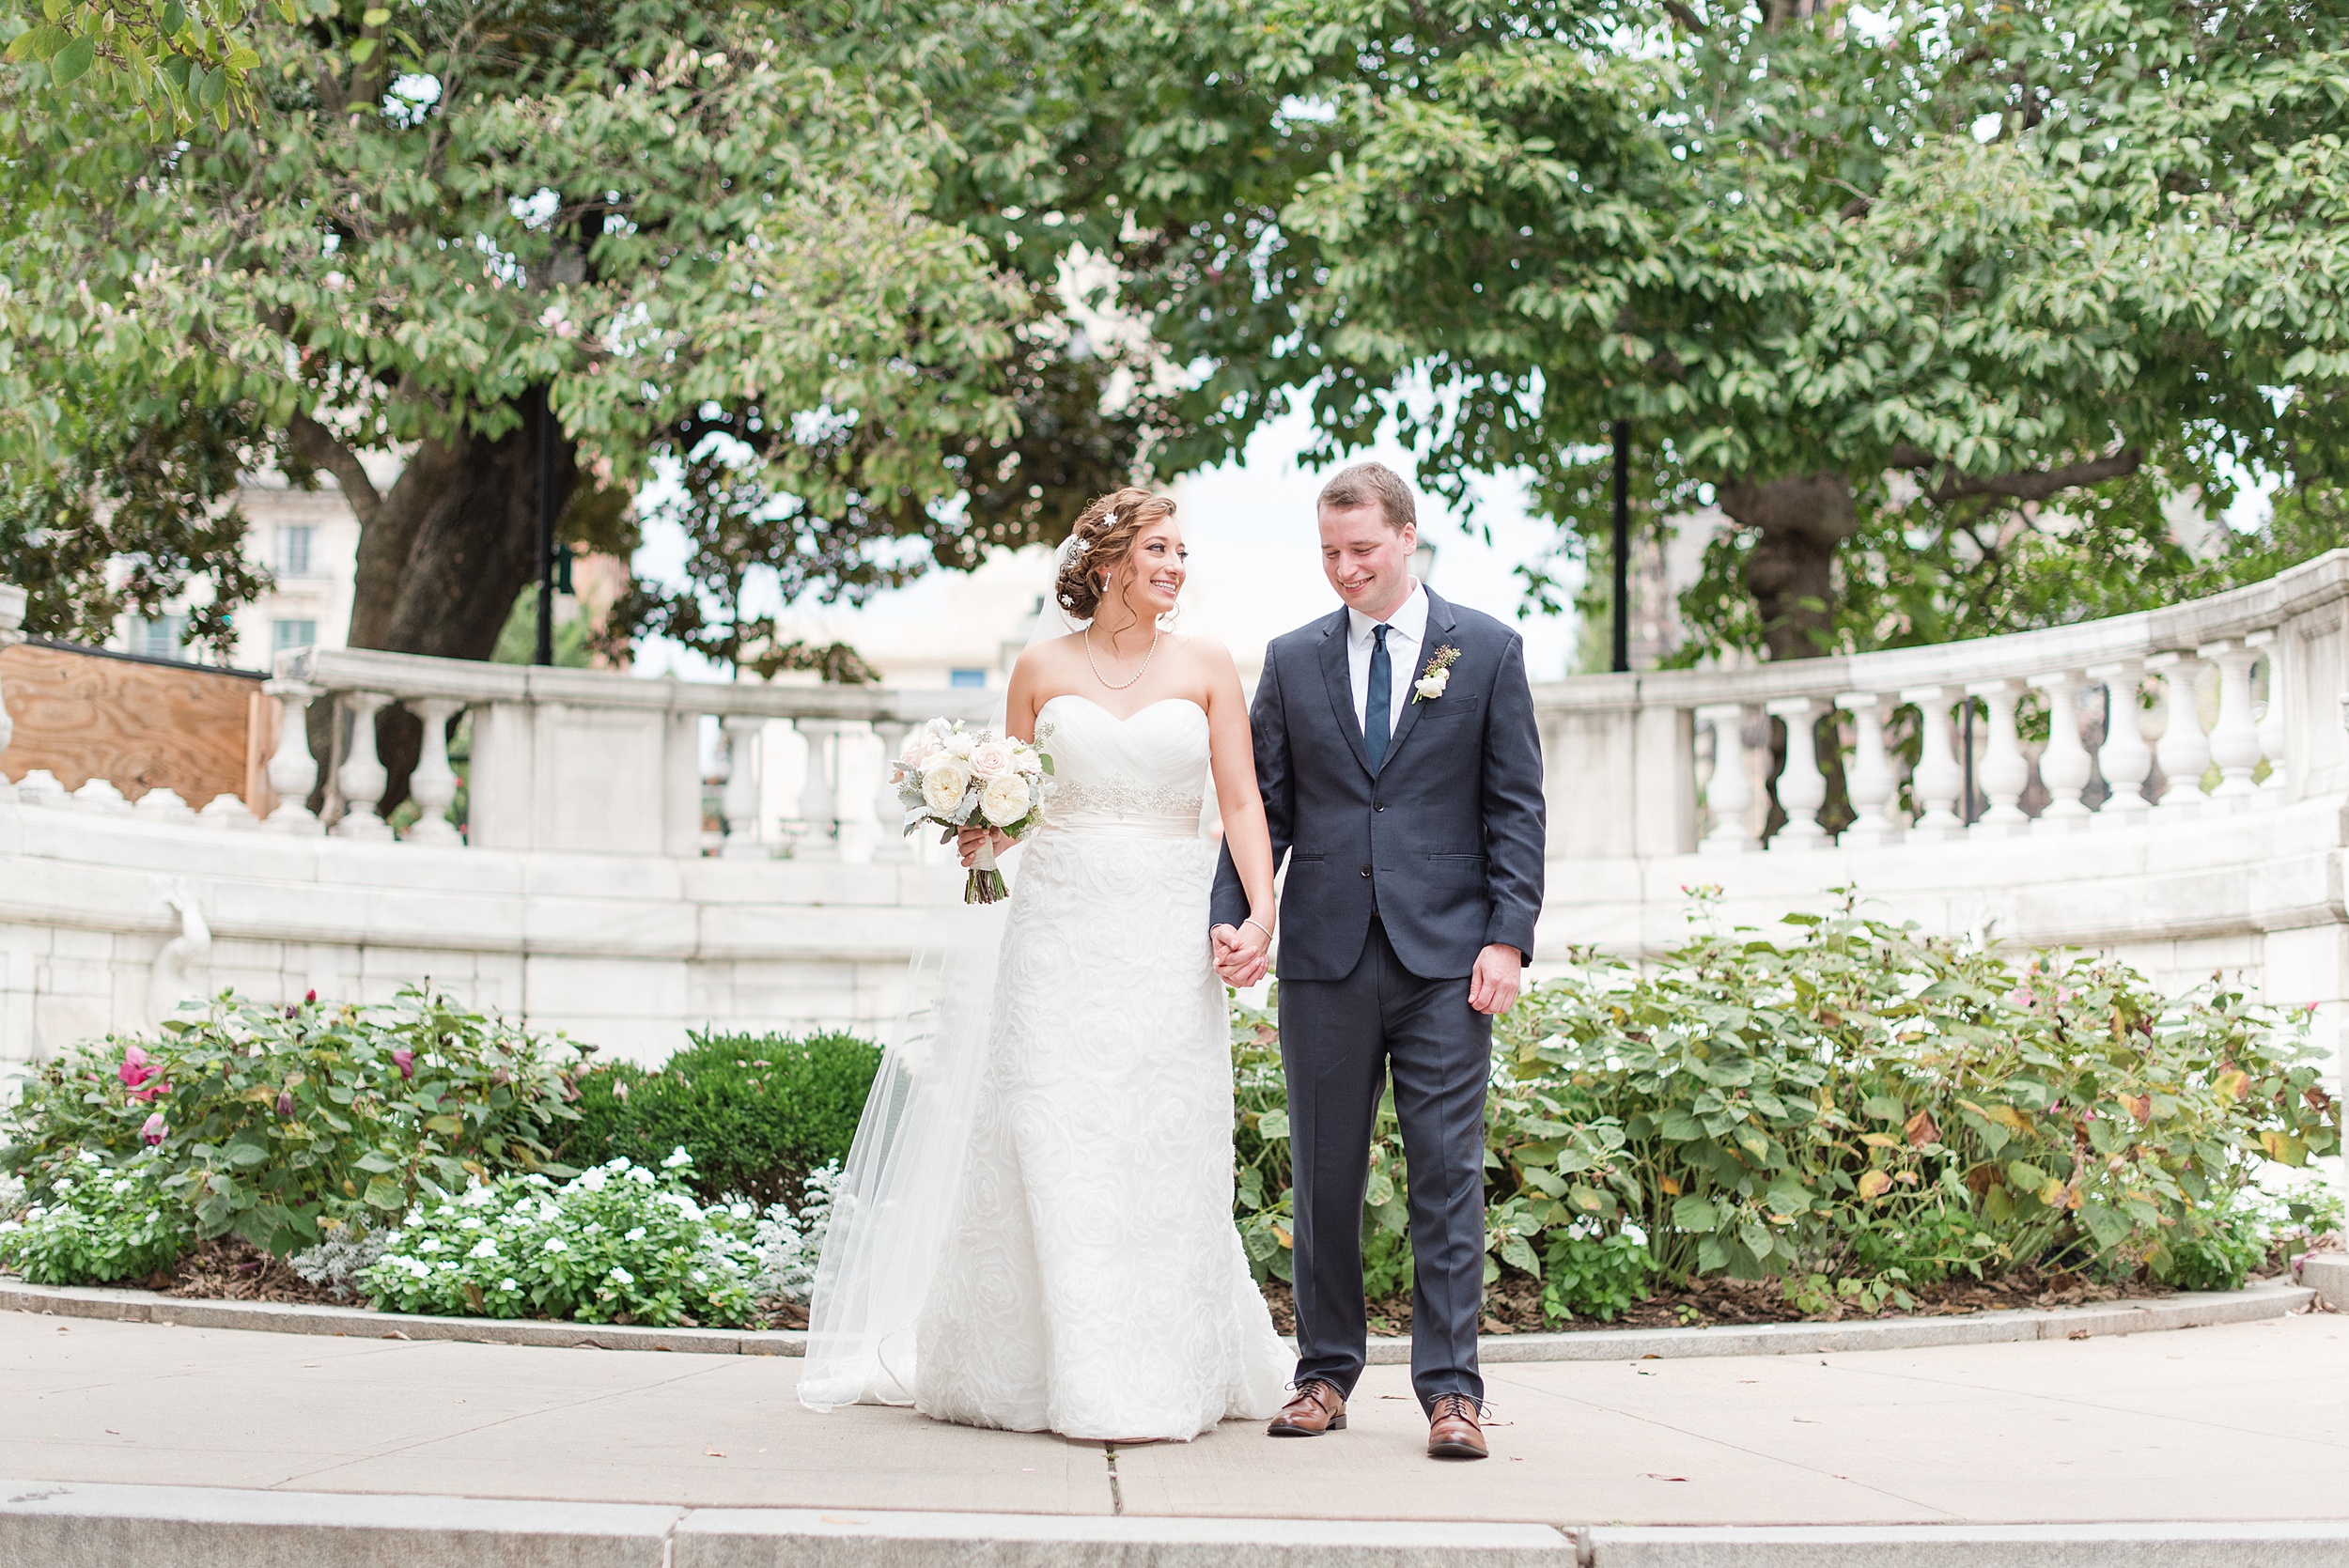 Newlyweds walk on a sidewalk in a garden holding hands at one of the beautiful Frederick Wedding Venues